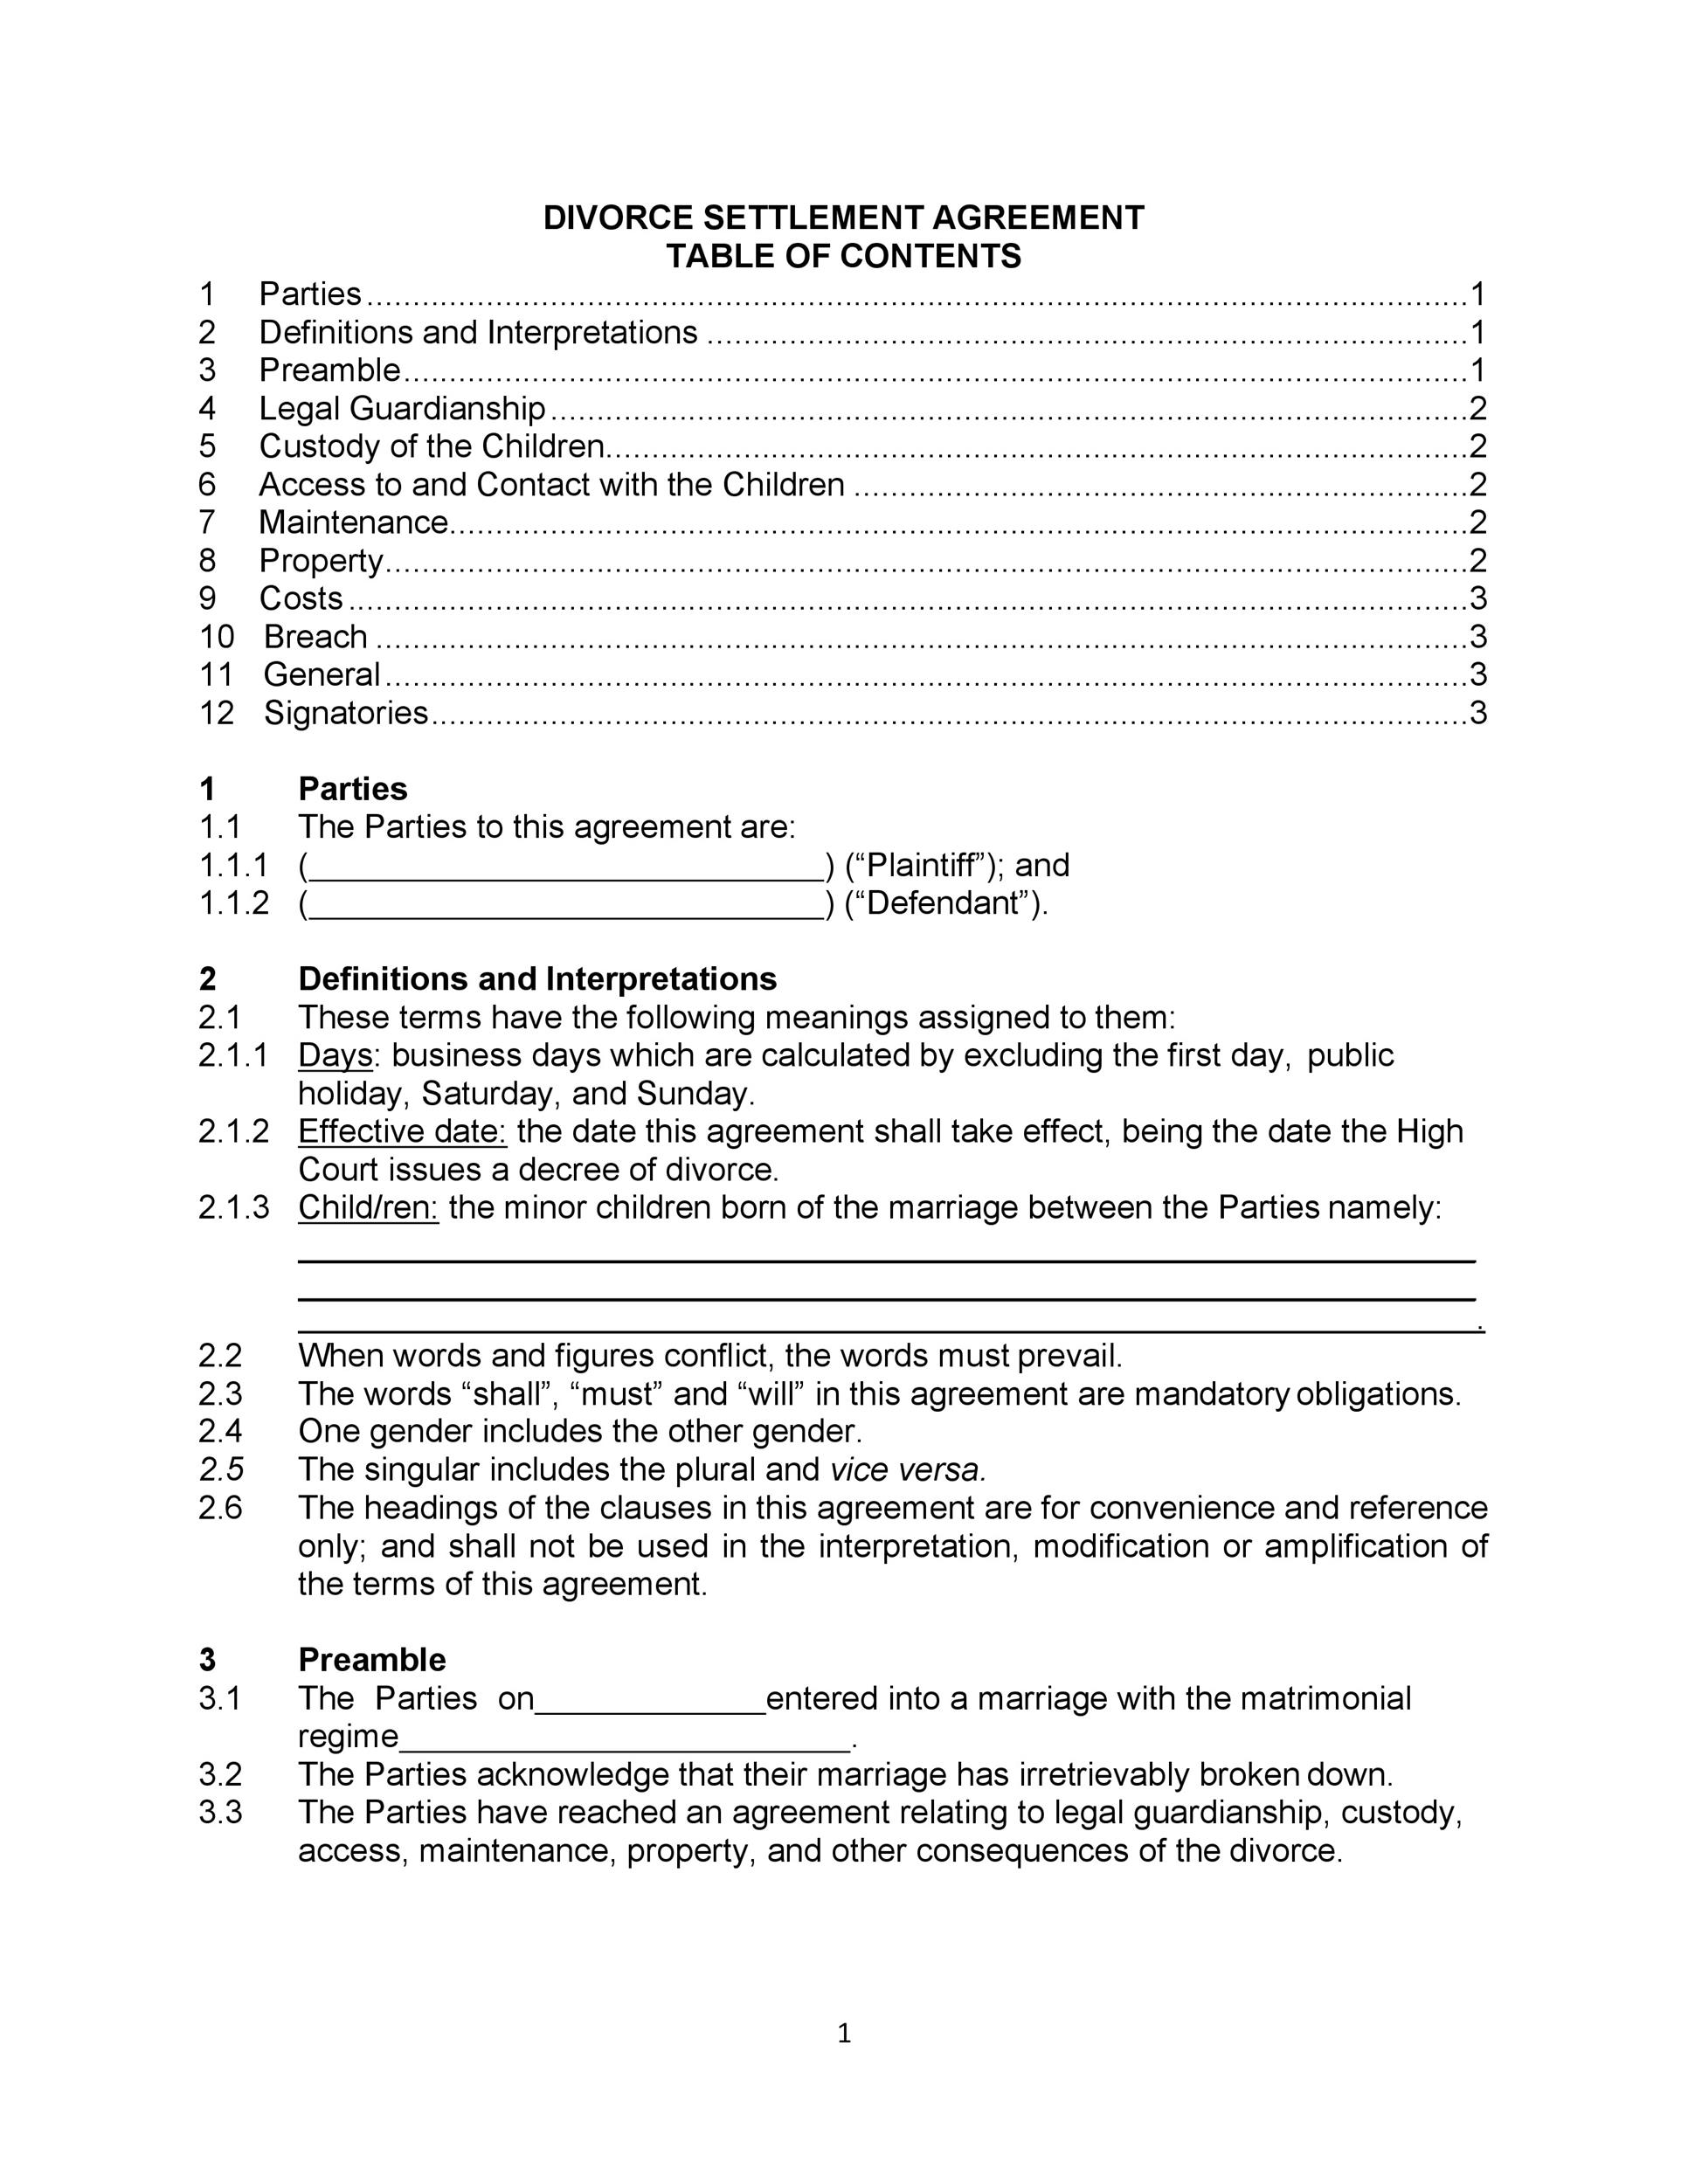 Voluntary Retrenchment Agreement Template South Africa  Best of Regarding shelter lodger agreement template